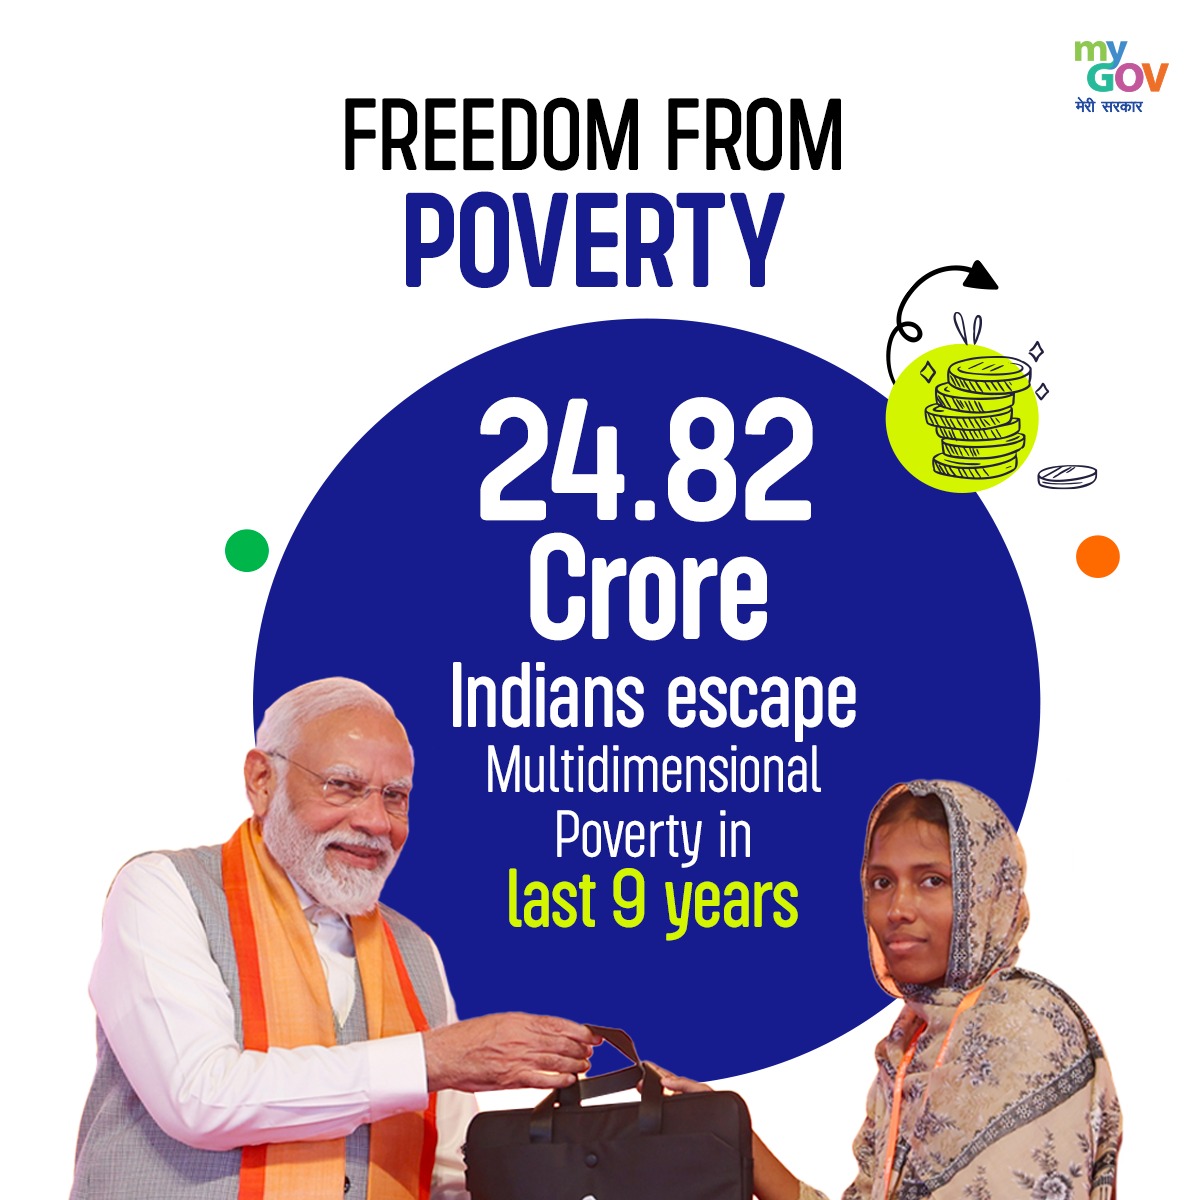 Witness the impact of the Modi Government's schemes, acknowledge Janbhagidari, and let's empower every corner of Bharat. 

24.82 crore+ citizens escaped poverty in the last 9 years. 

Together, let's achieve 100% saturation! 

#ViksitBharatSankalpYatra #HamaraSankalpViksitBharat